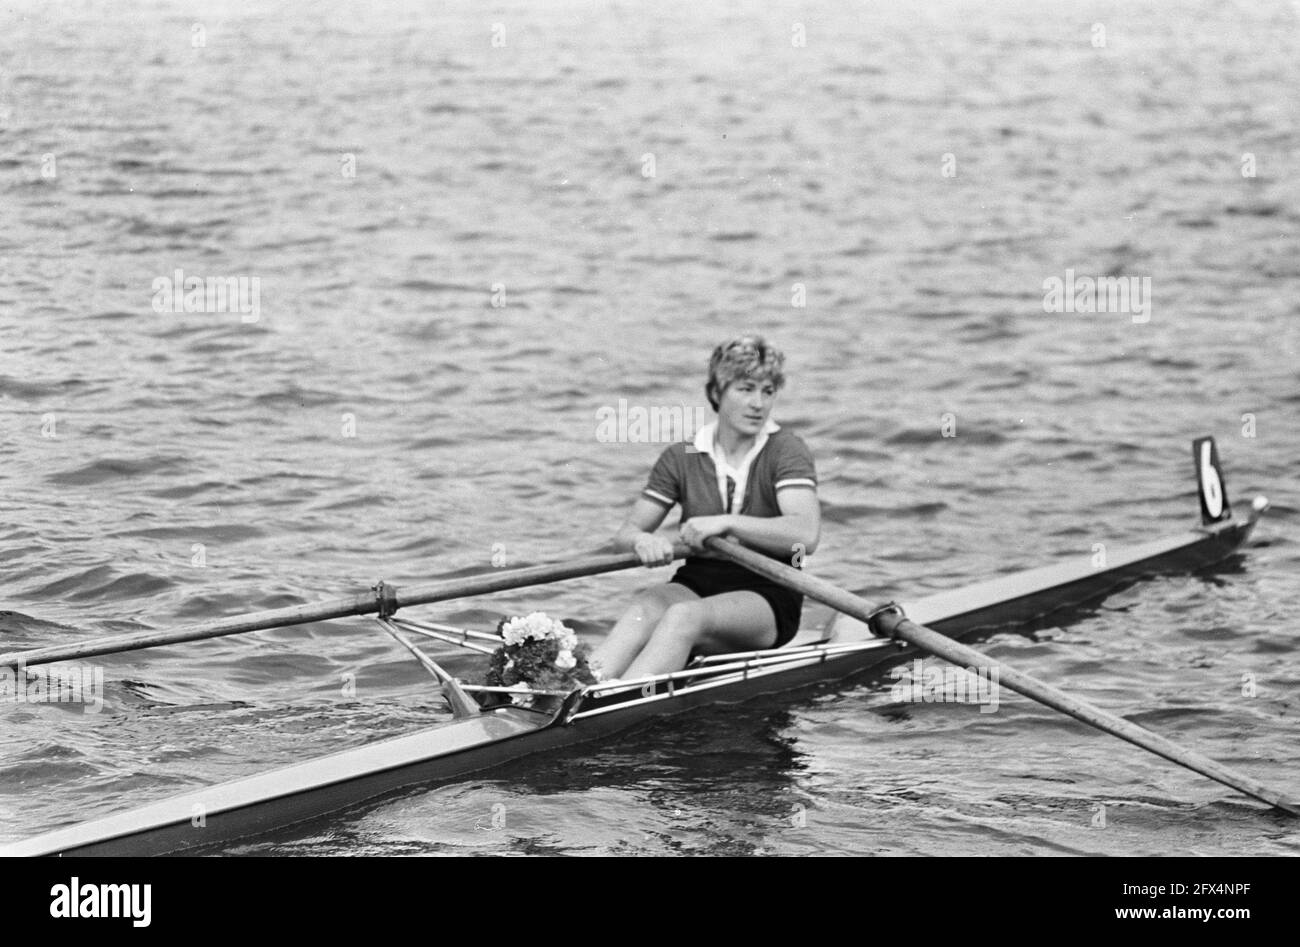 Women's European Rowing Championships in Duisburg, No. 14 French skiffeuse Renee Camus, August 20, 1965, Rowing, championships, The Netherlands, 20th century press agency photo, news to remember, documentary, historic photography 1945-1990, visual stories, human history of the Twentieth Century, capturing moments in time Stock Photo